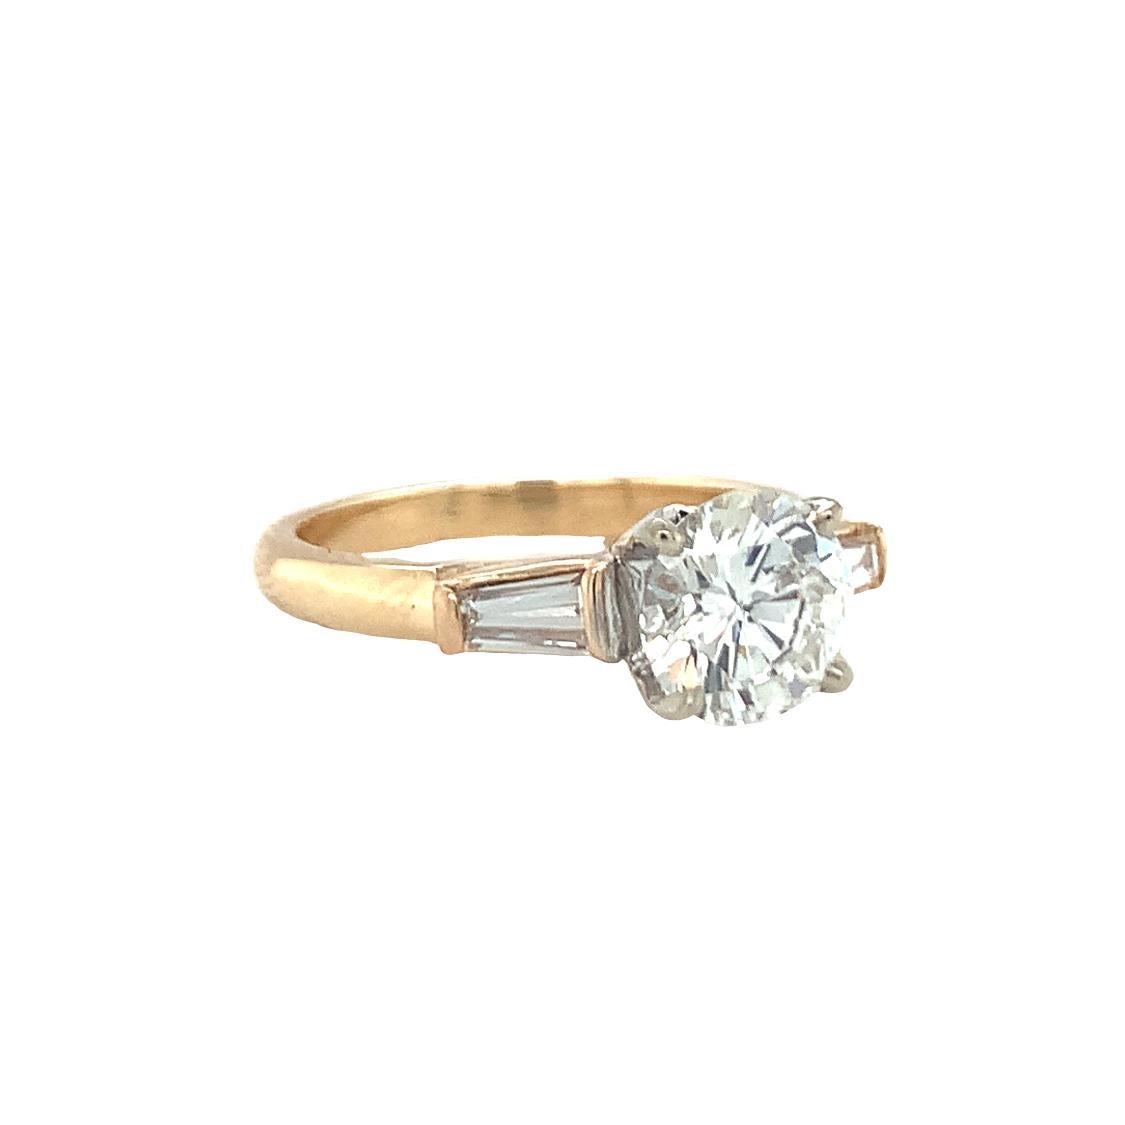 One GIA certified 1.22 ct. round brilliant cut diamond 14K yellow gold engagement ring featuring one diamond weighing 1.22 ct., with H color and SI-1 clarity with GIA cert enhanced by two tapered baguette diamonds weighing 0.20 ct. in total weight,